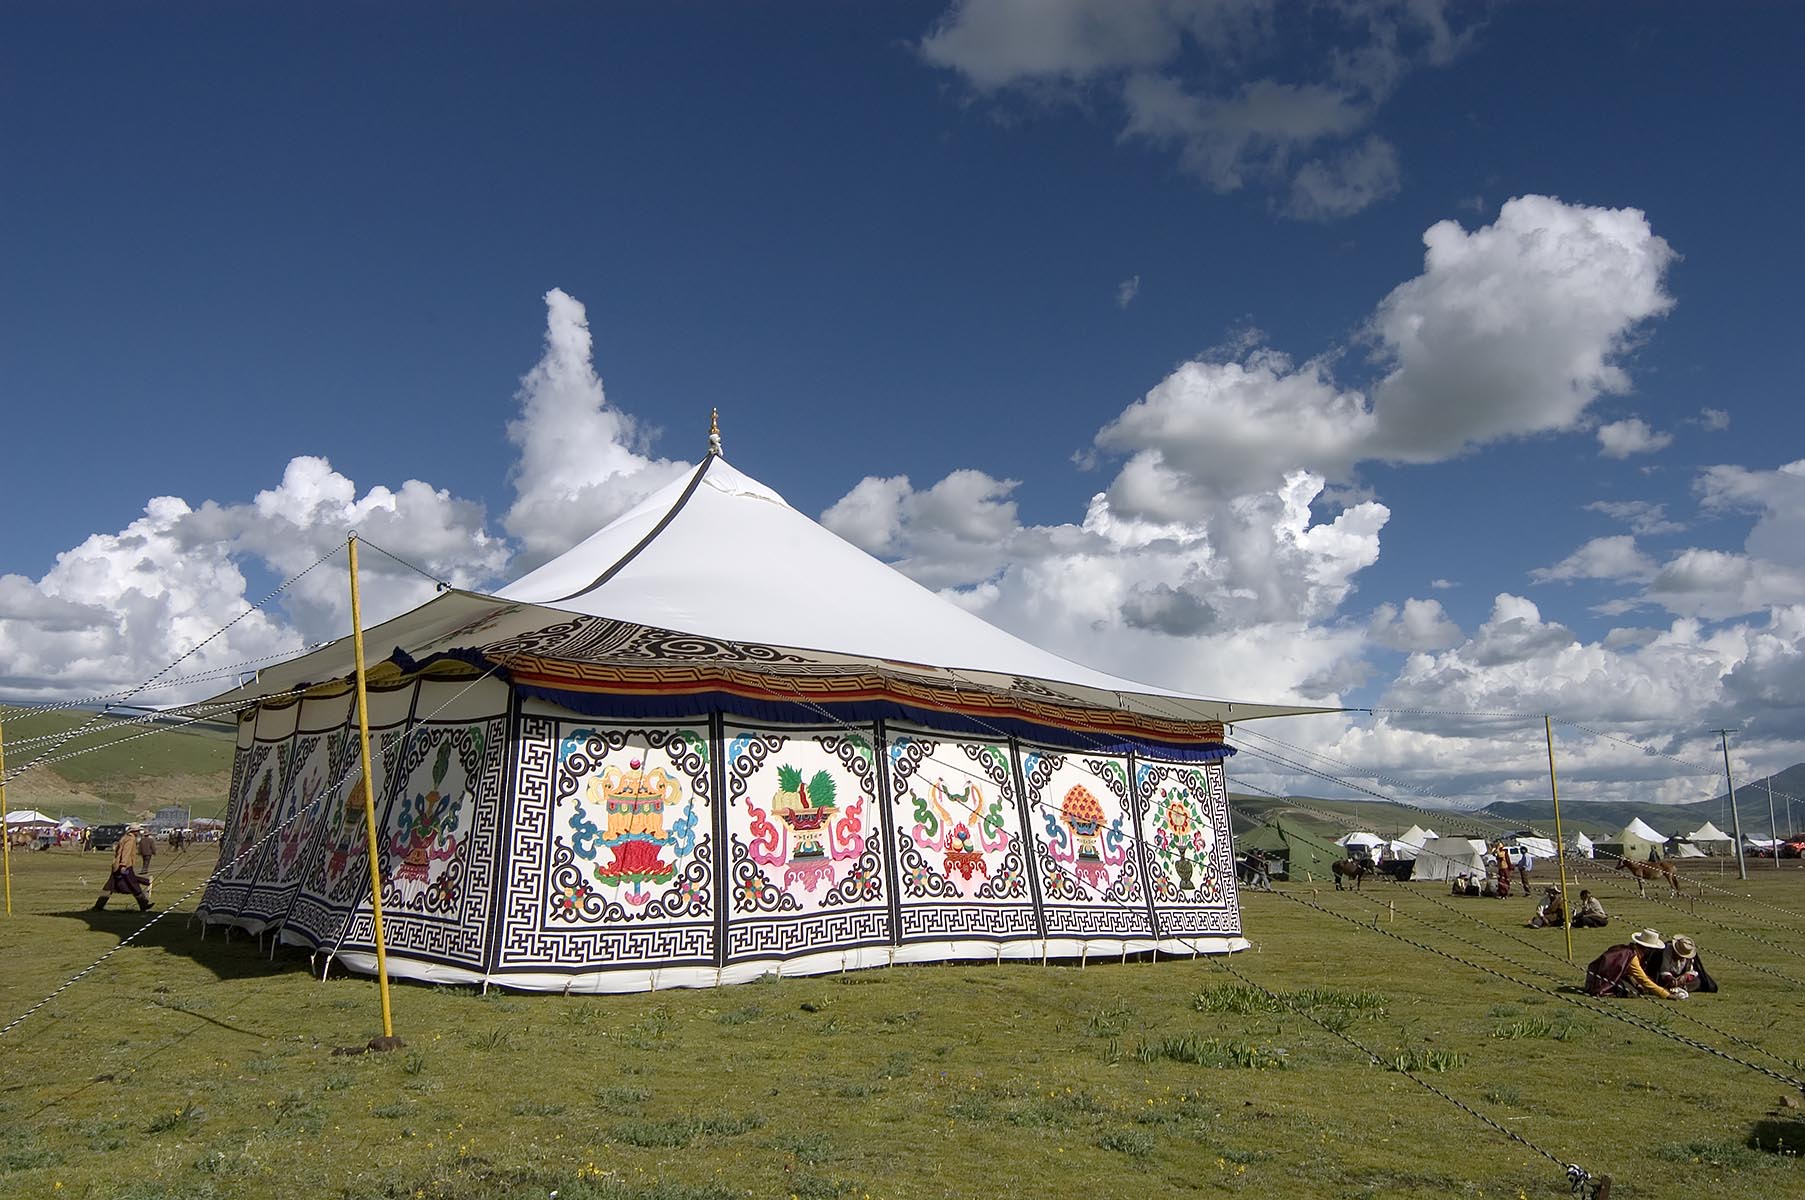 Tibetan tents with Buddhist designs are used for accommodation, Litang Horse Festival in Kham - Sichuan Province, China, (Tibet)